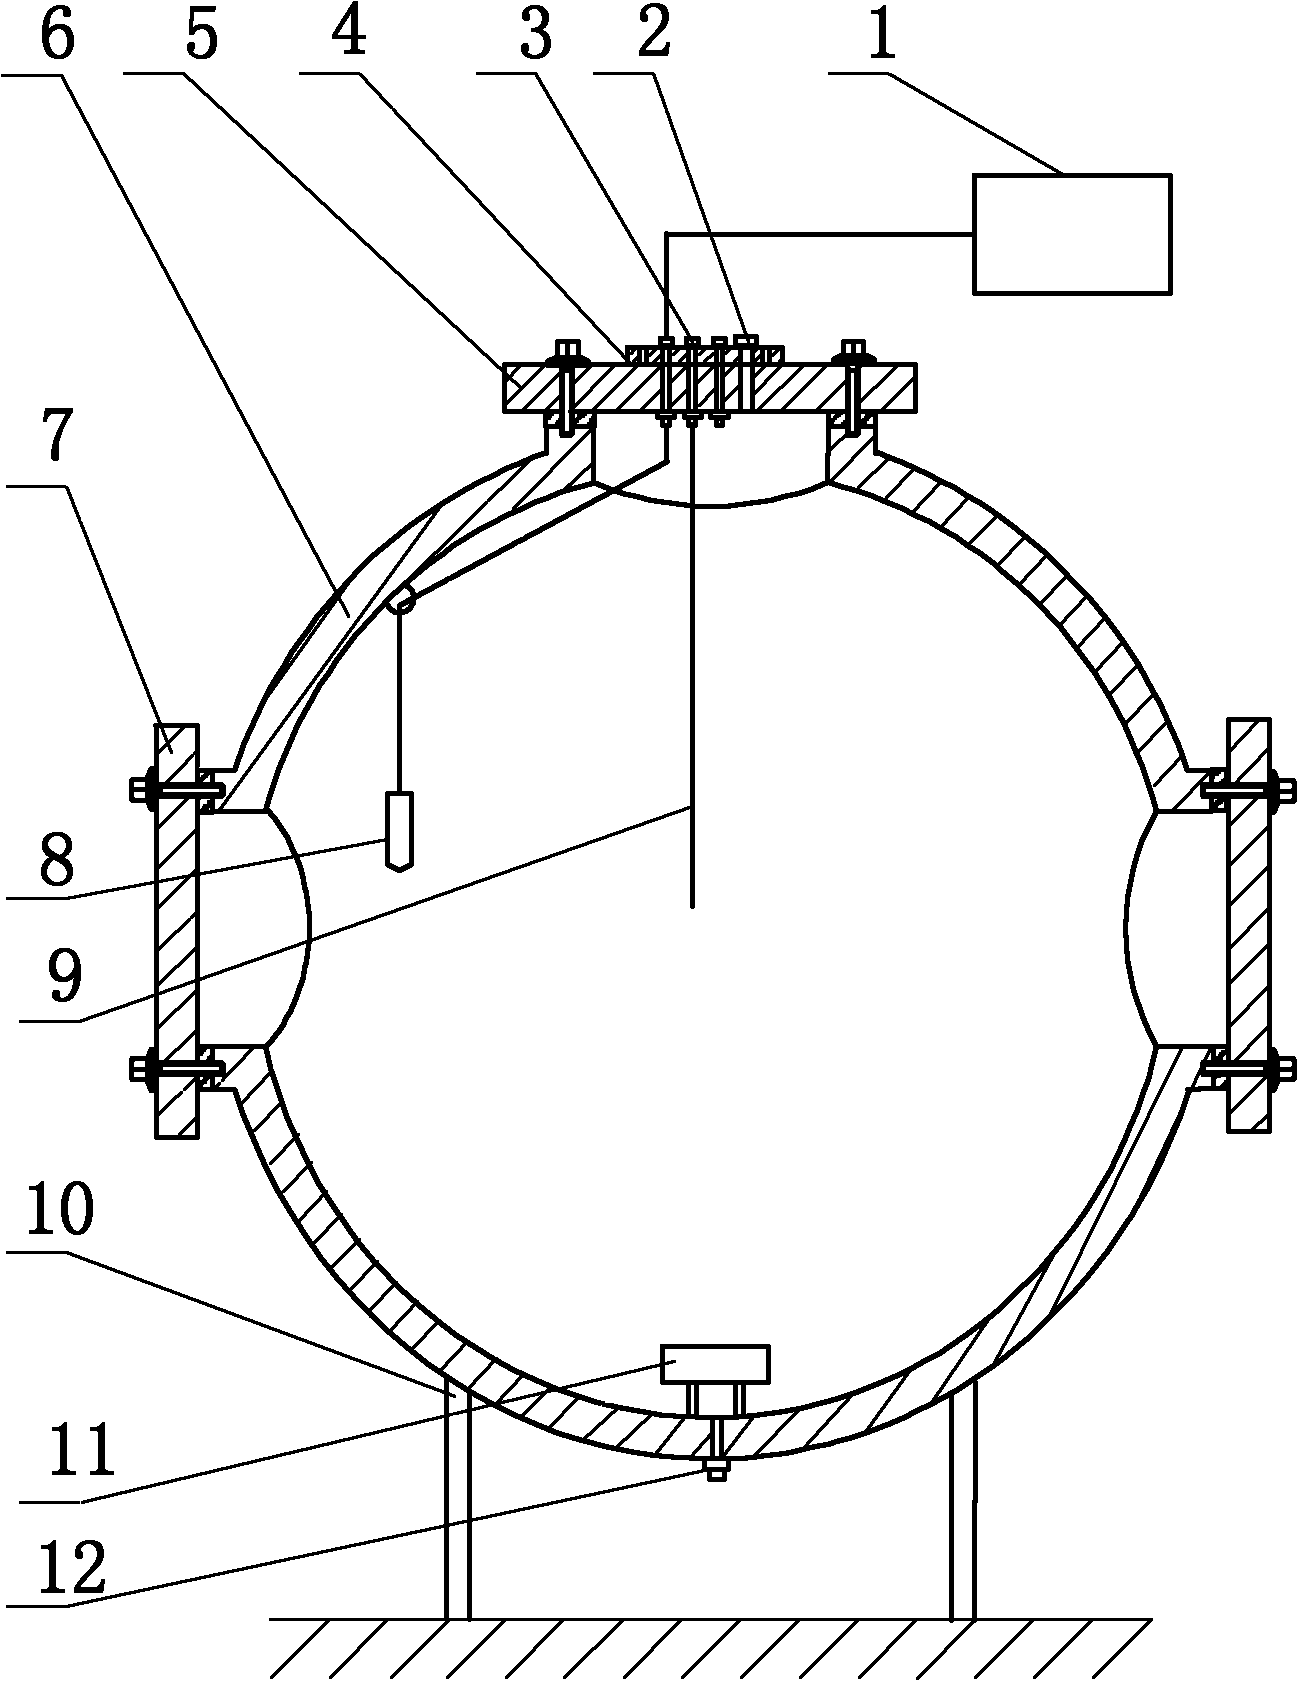 Experimental device for simulating 200-meter deep water blasting under moving water state